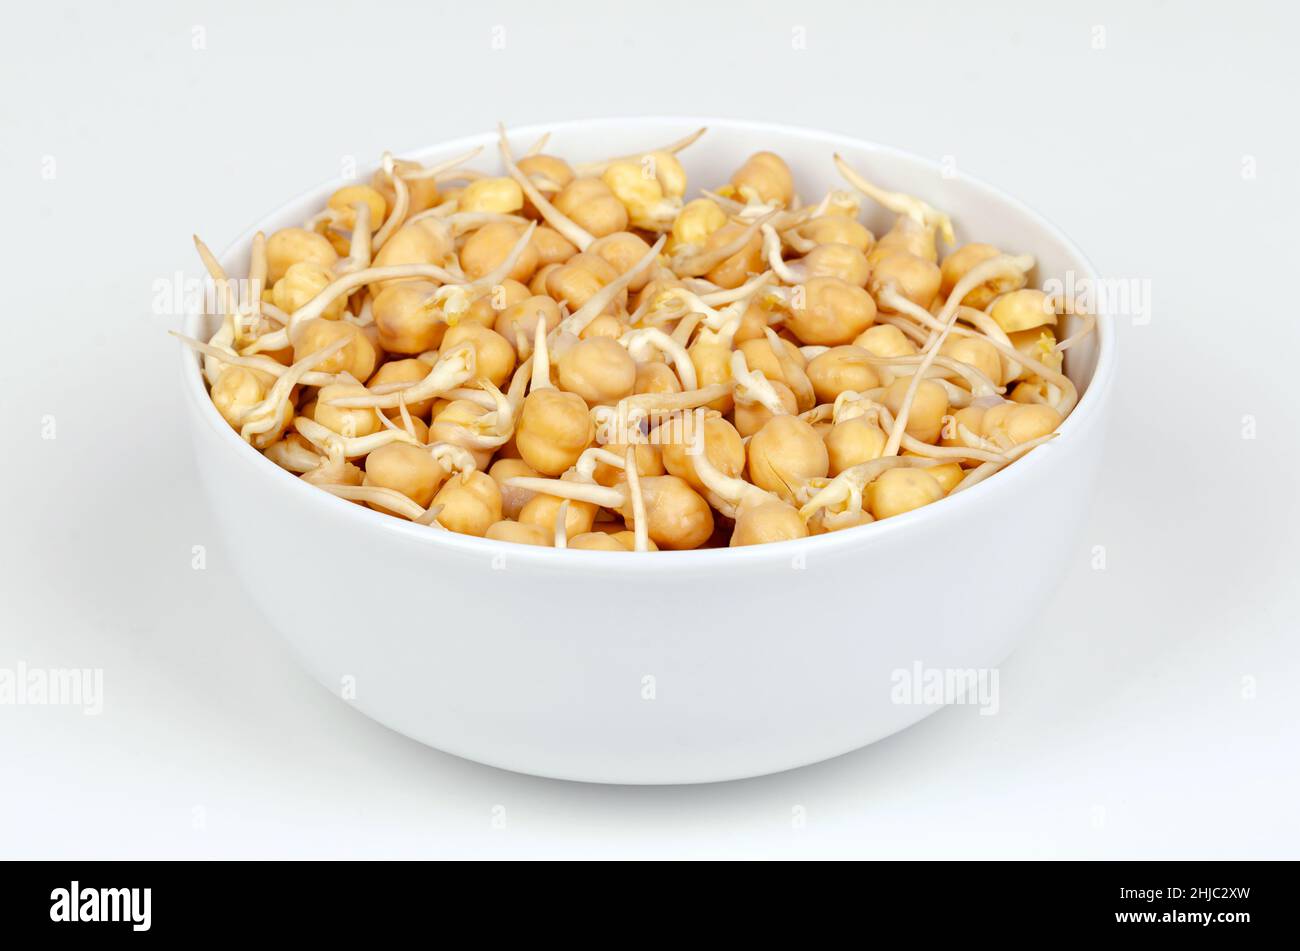 Chickpea sprouts, in a white bowl, front view, on white surface. Ready to eat, sprouted chickpeas, seeds of Cicer arietinum, legume and protein source. Stock Photo